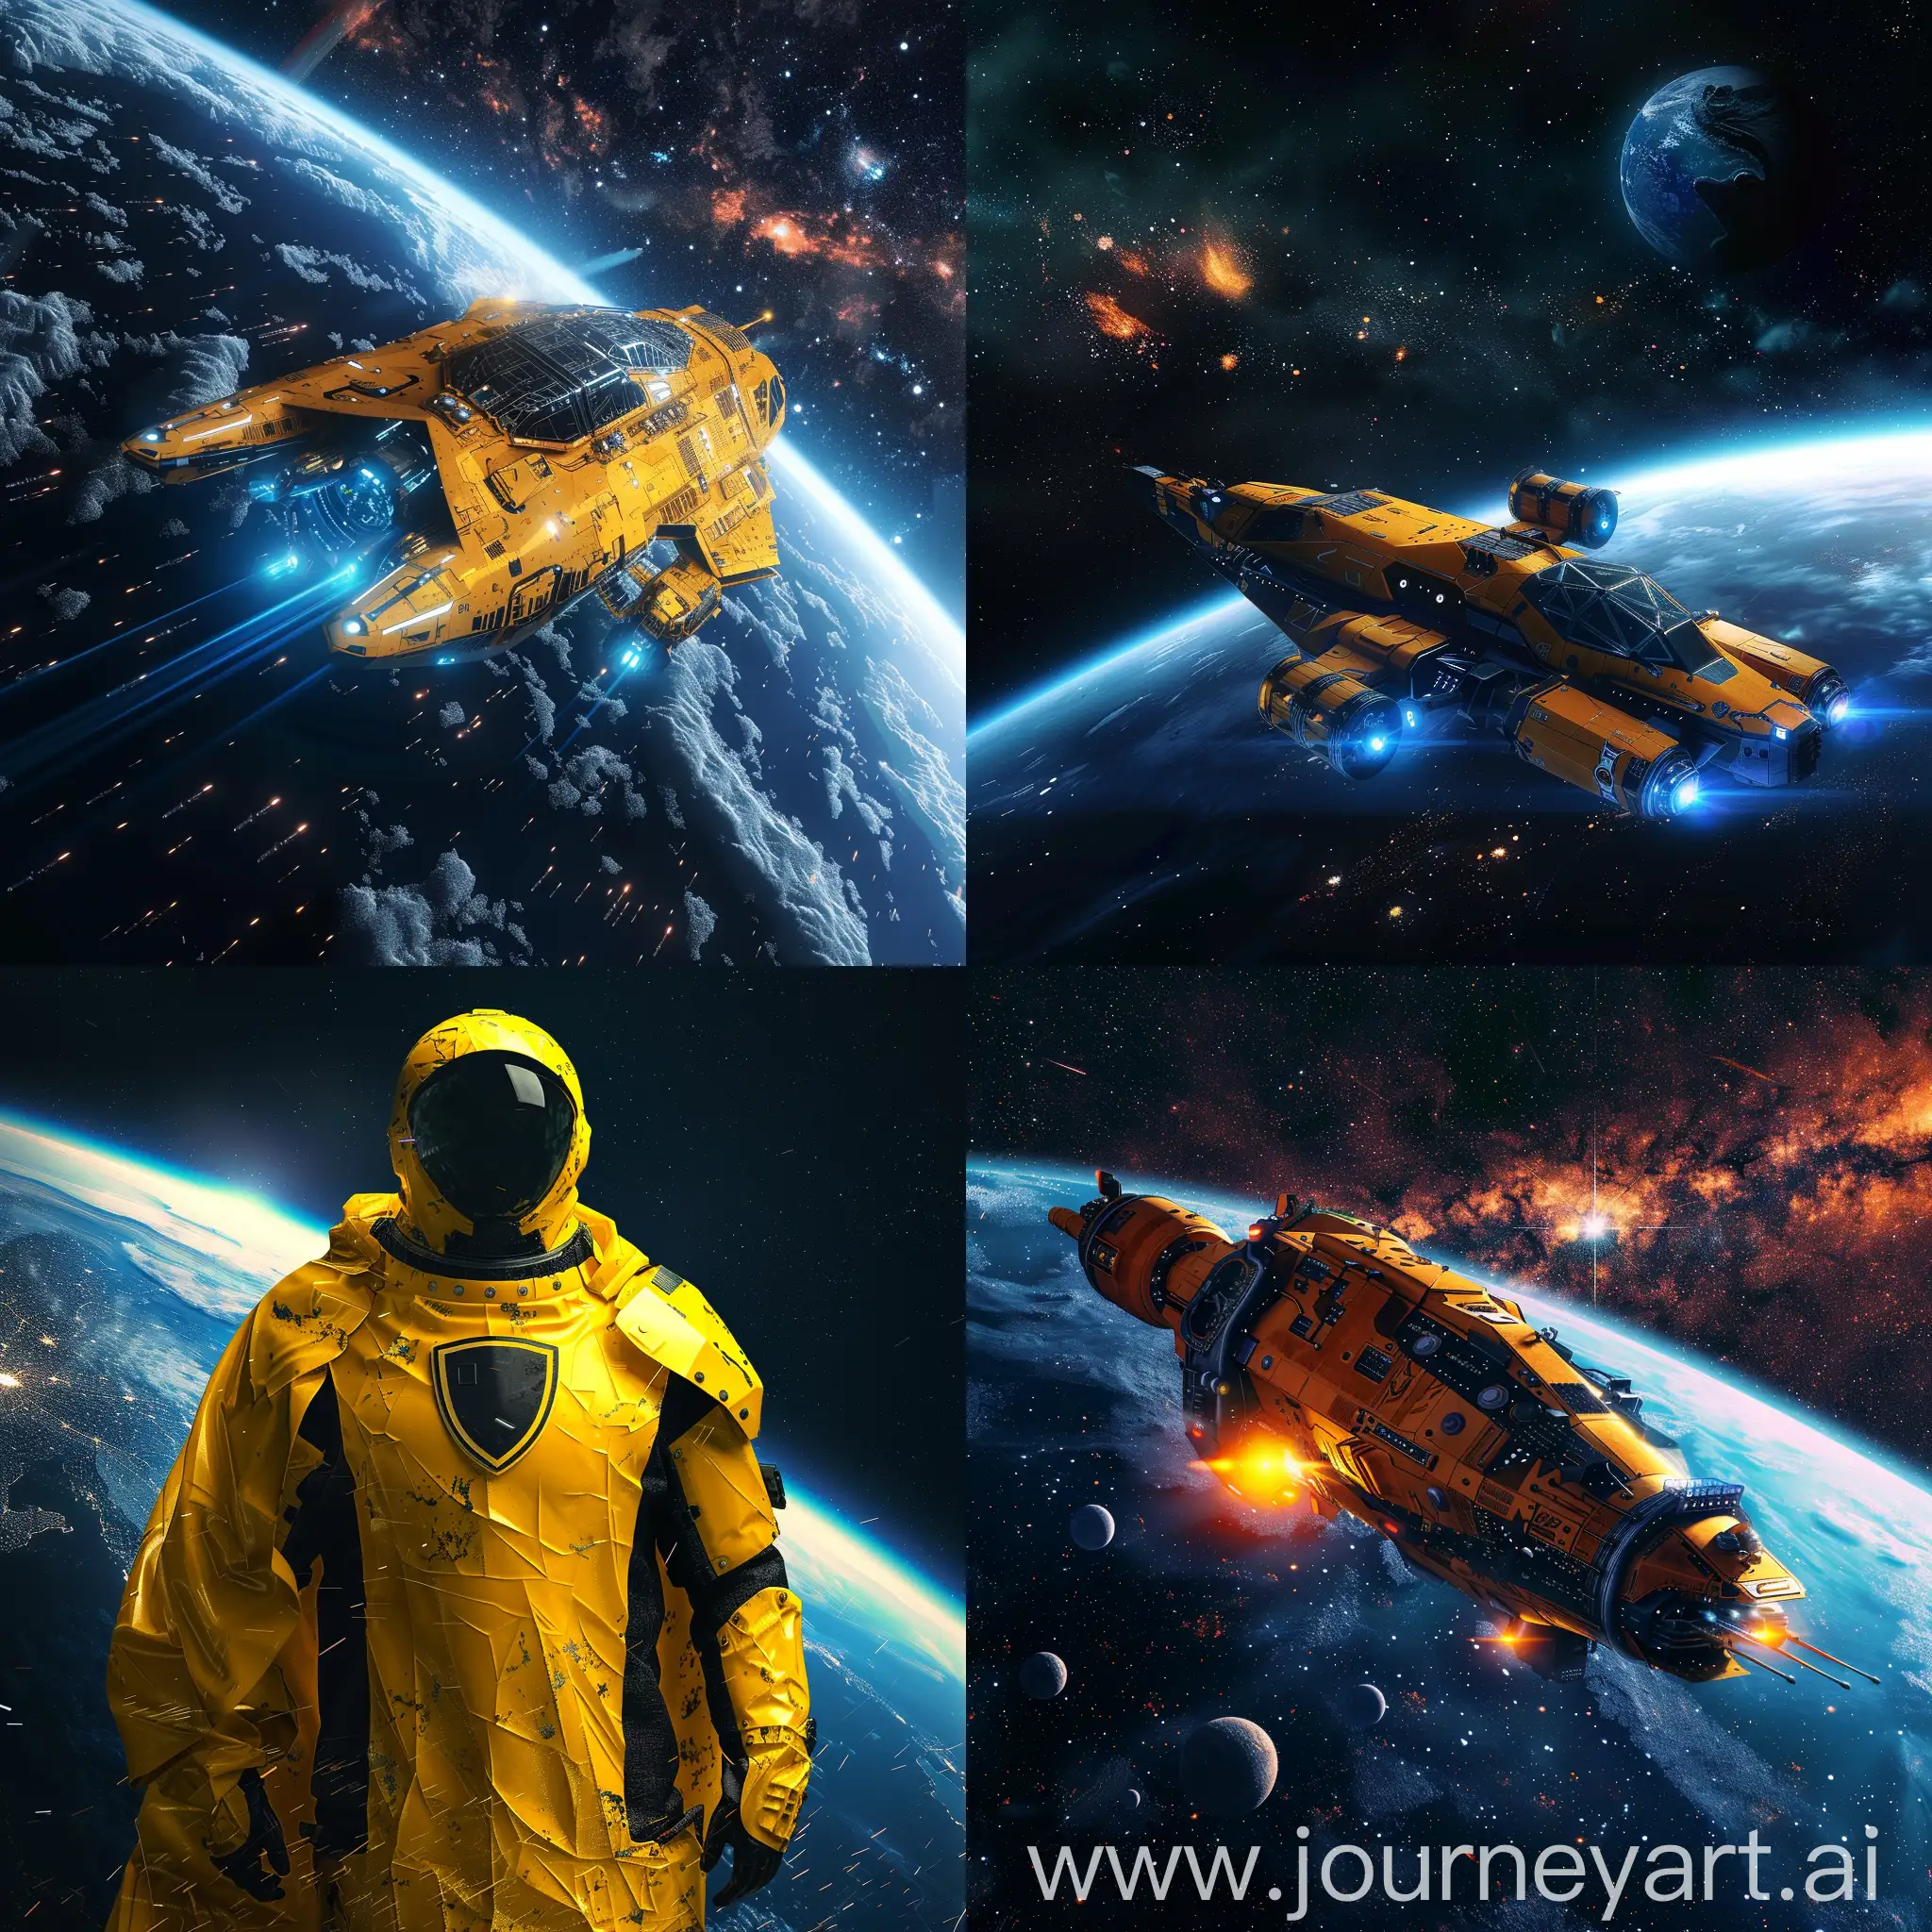 Cyber-Defender-in-Yellow-Futuristic-Space-Style-Photo-Art